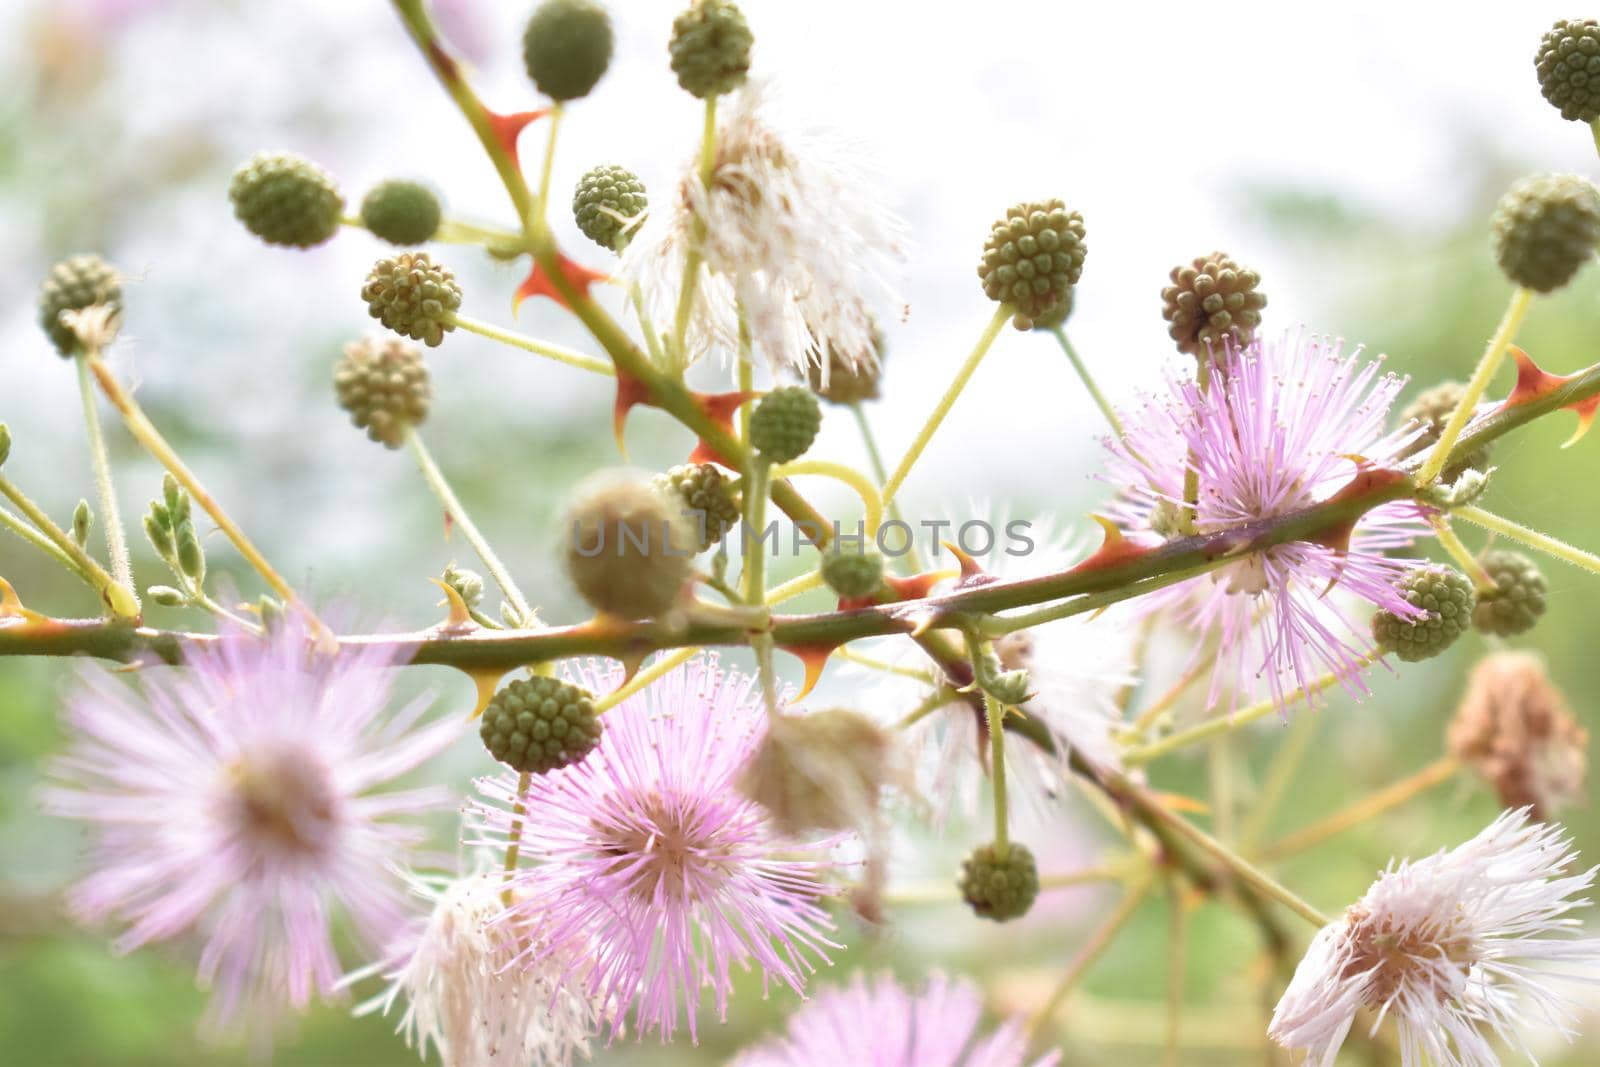 Mimosa pudica, also called sensitive plant, sleepy plant, action plant, touch-me-not, by tabishere